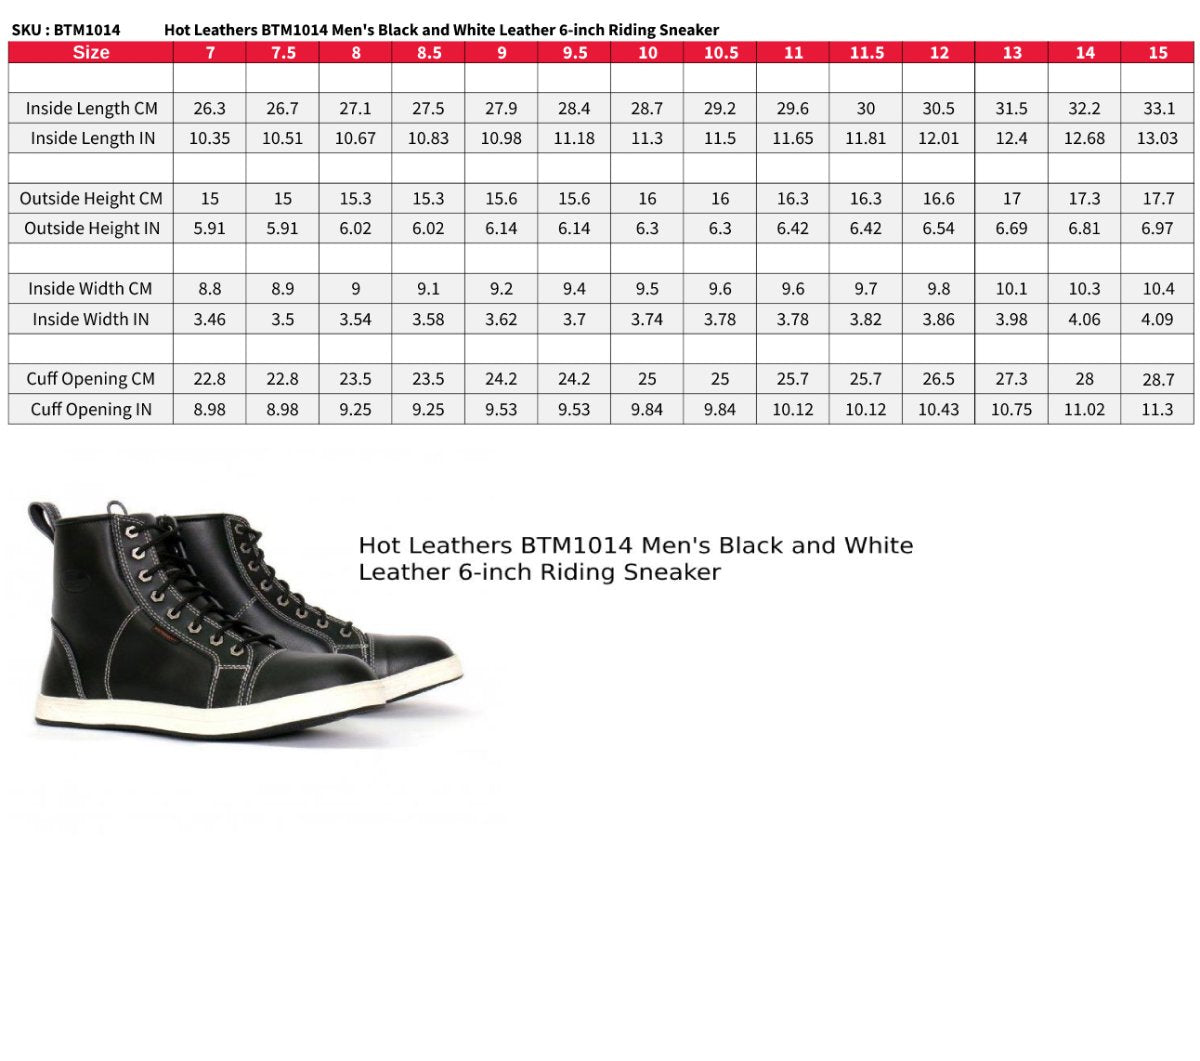 Hot Leathers BTM1014 Men's Black and White Leather 6-inch Riding Sneaker